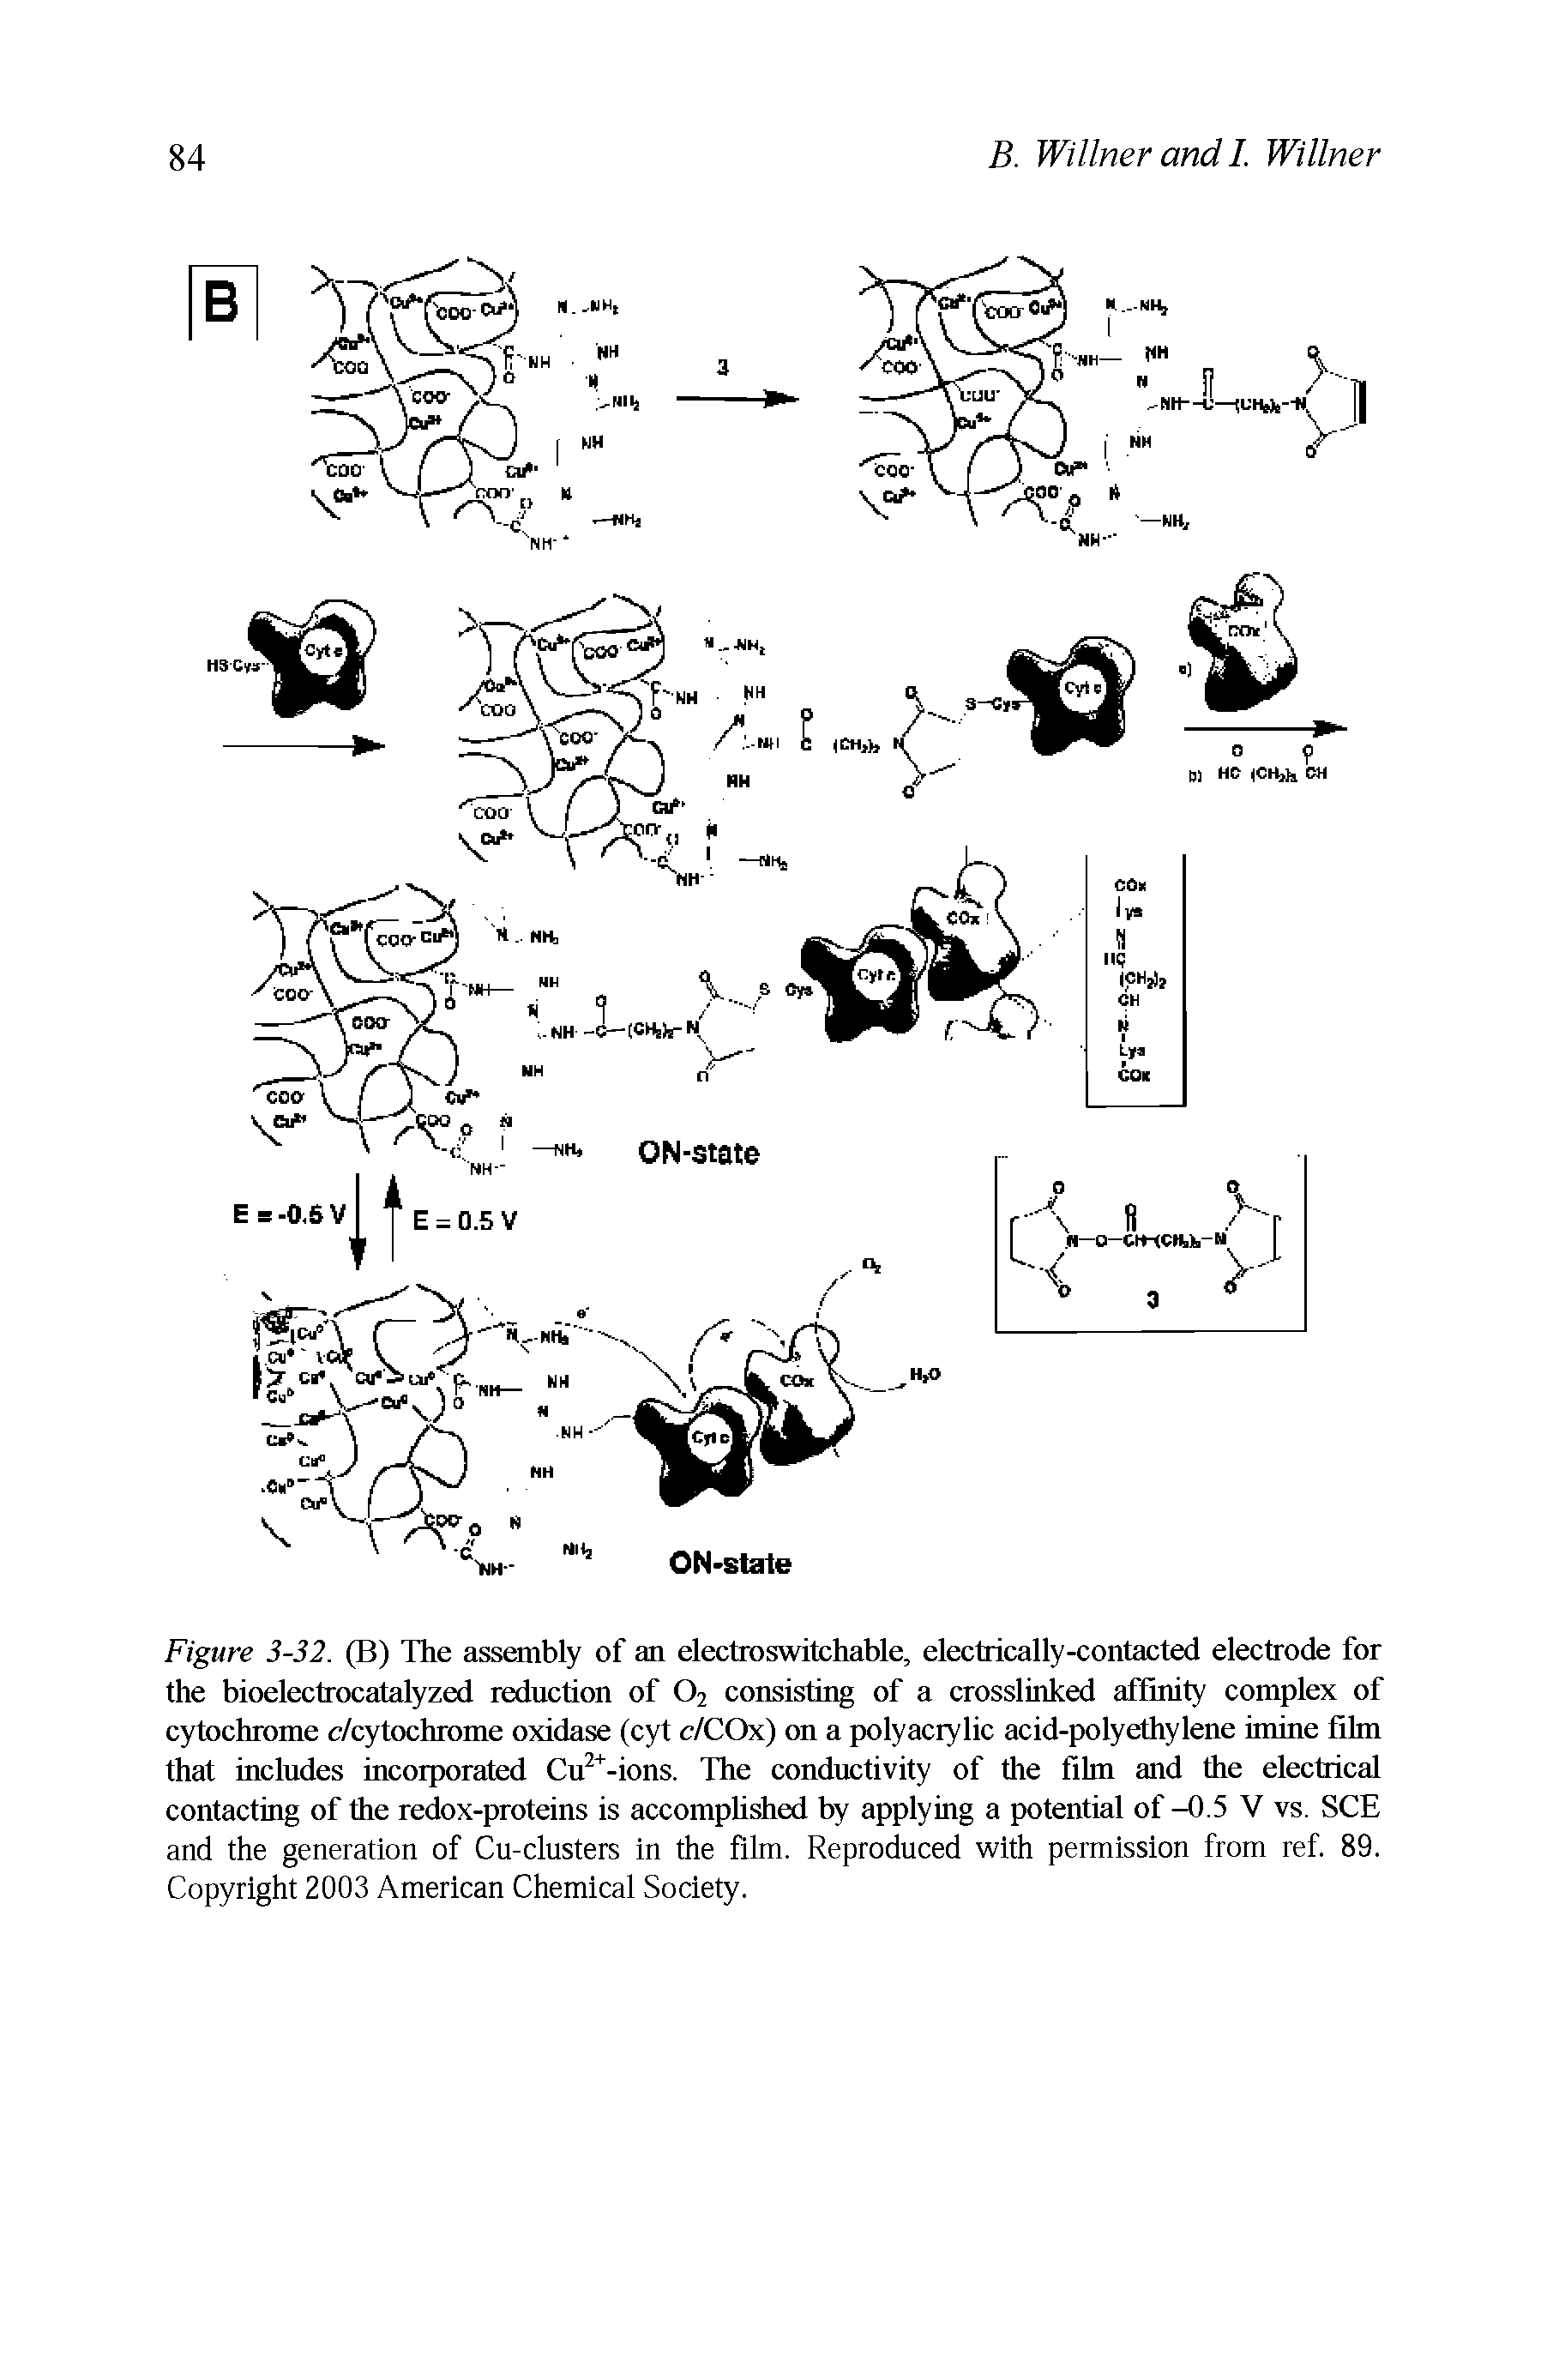 Figure 3-32. (B) The assembly of an electroswitchable, electrically-contacted electrode for the bioelectrocatalyzed reduction of O2 consisting of a crosslinked affinity complex of cytochrome c/cytochrome oxidase (cyt c/COx) on a polyacrylic acid-polyethylene imine film that includes incorporated Cu -ions. The conductivity of the film and the electrical contacting of the redox-proteins is accomphshed by applying a potential of -0.5 V vs. SCE and the generation of Cu-clusters in the film. Reproduced with permission from ref. 89. Copyright 2003 American Chemical Society.